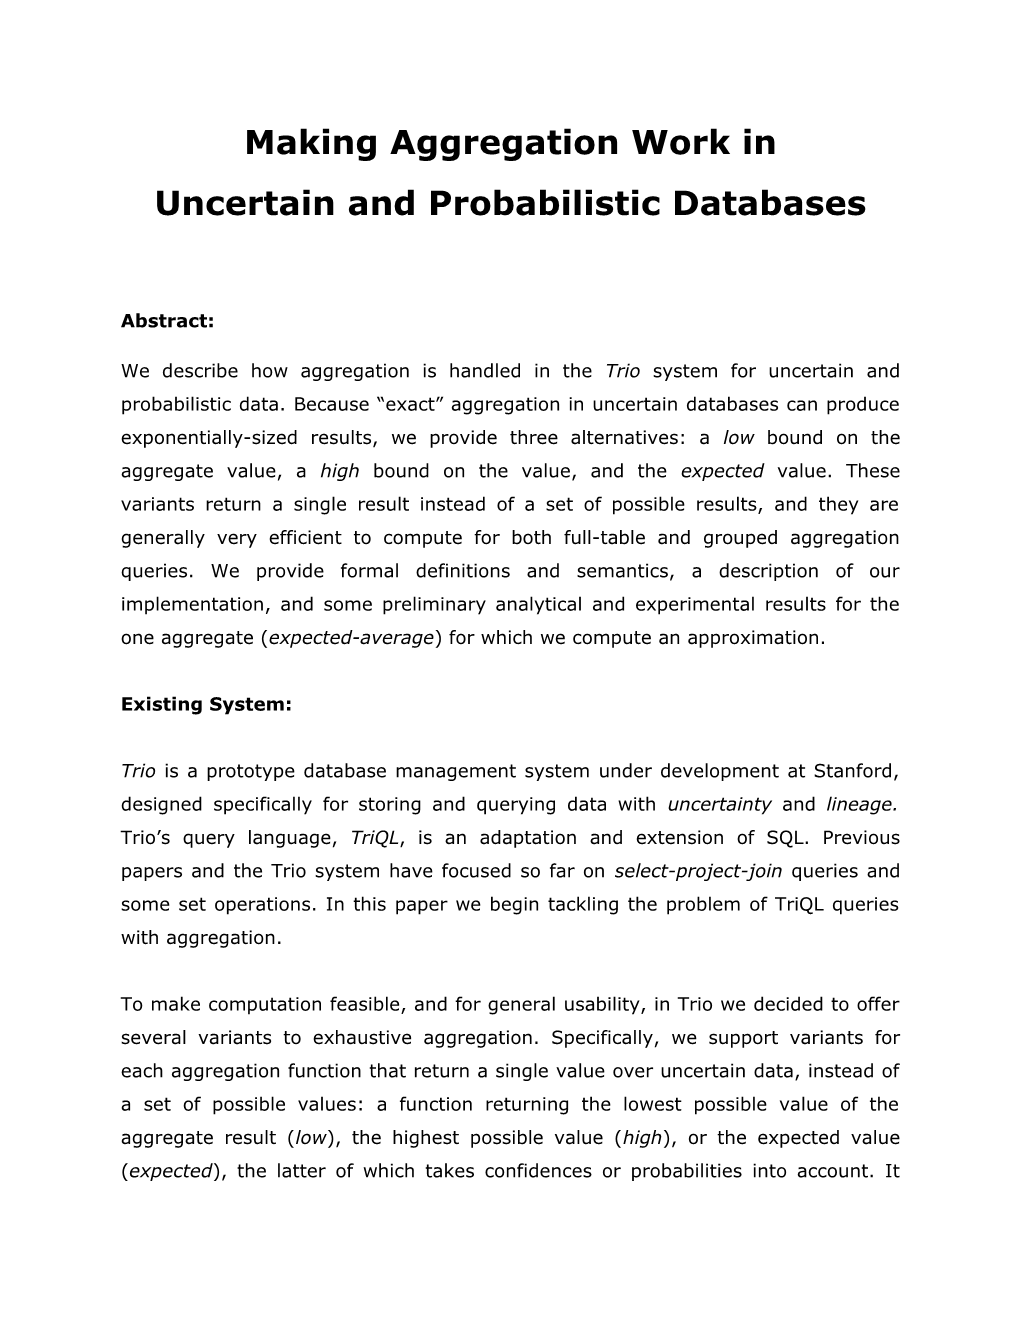 Uncertain and Probabilistic Databases